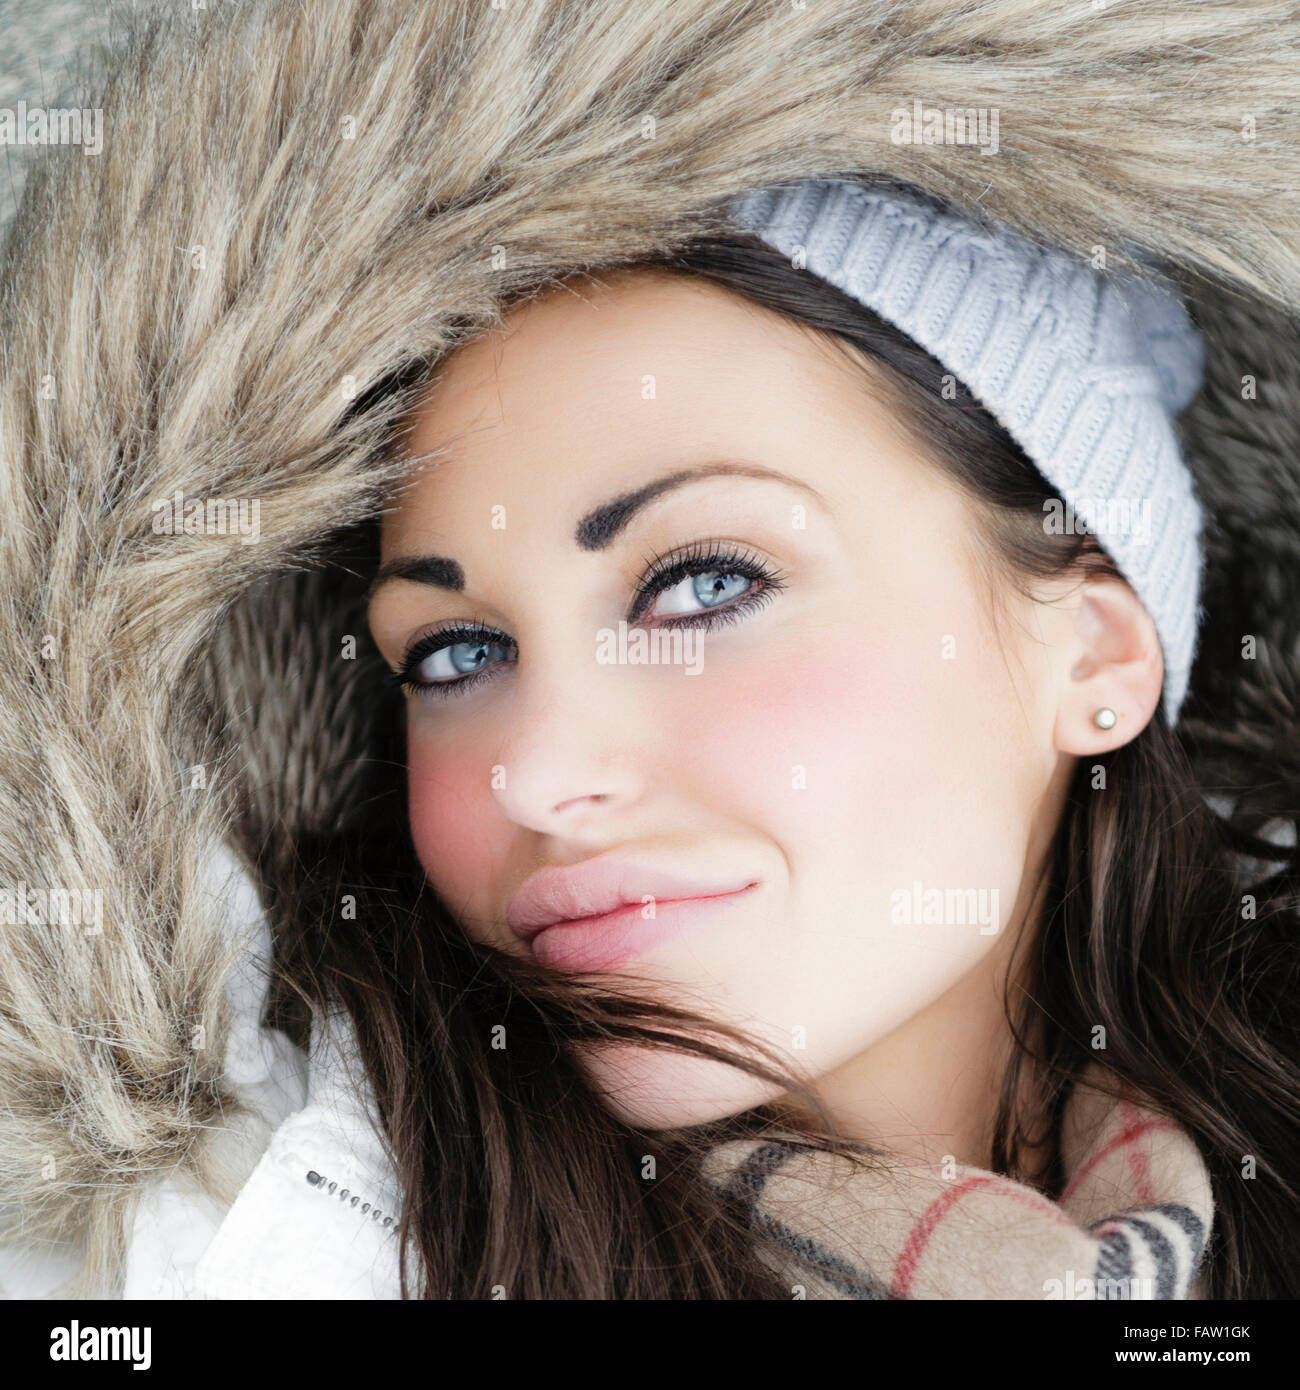 Outdoor beauty portrait of beautiful attractive young woman in warm fur lined hooded winter coat or jacket  Model Release: Yes.  Property release: No. Stock Photo